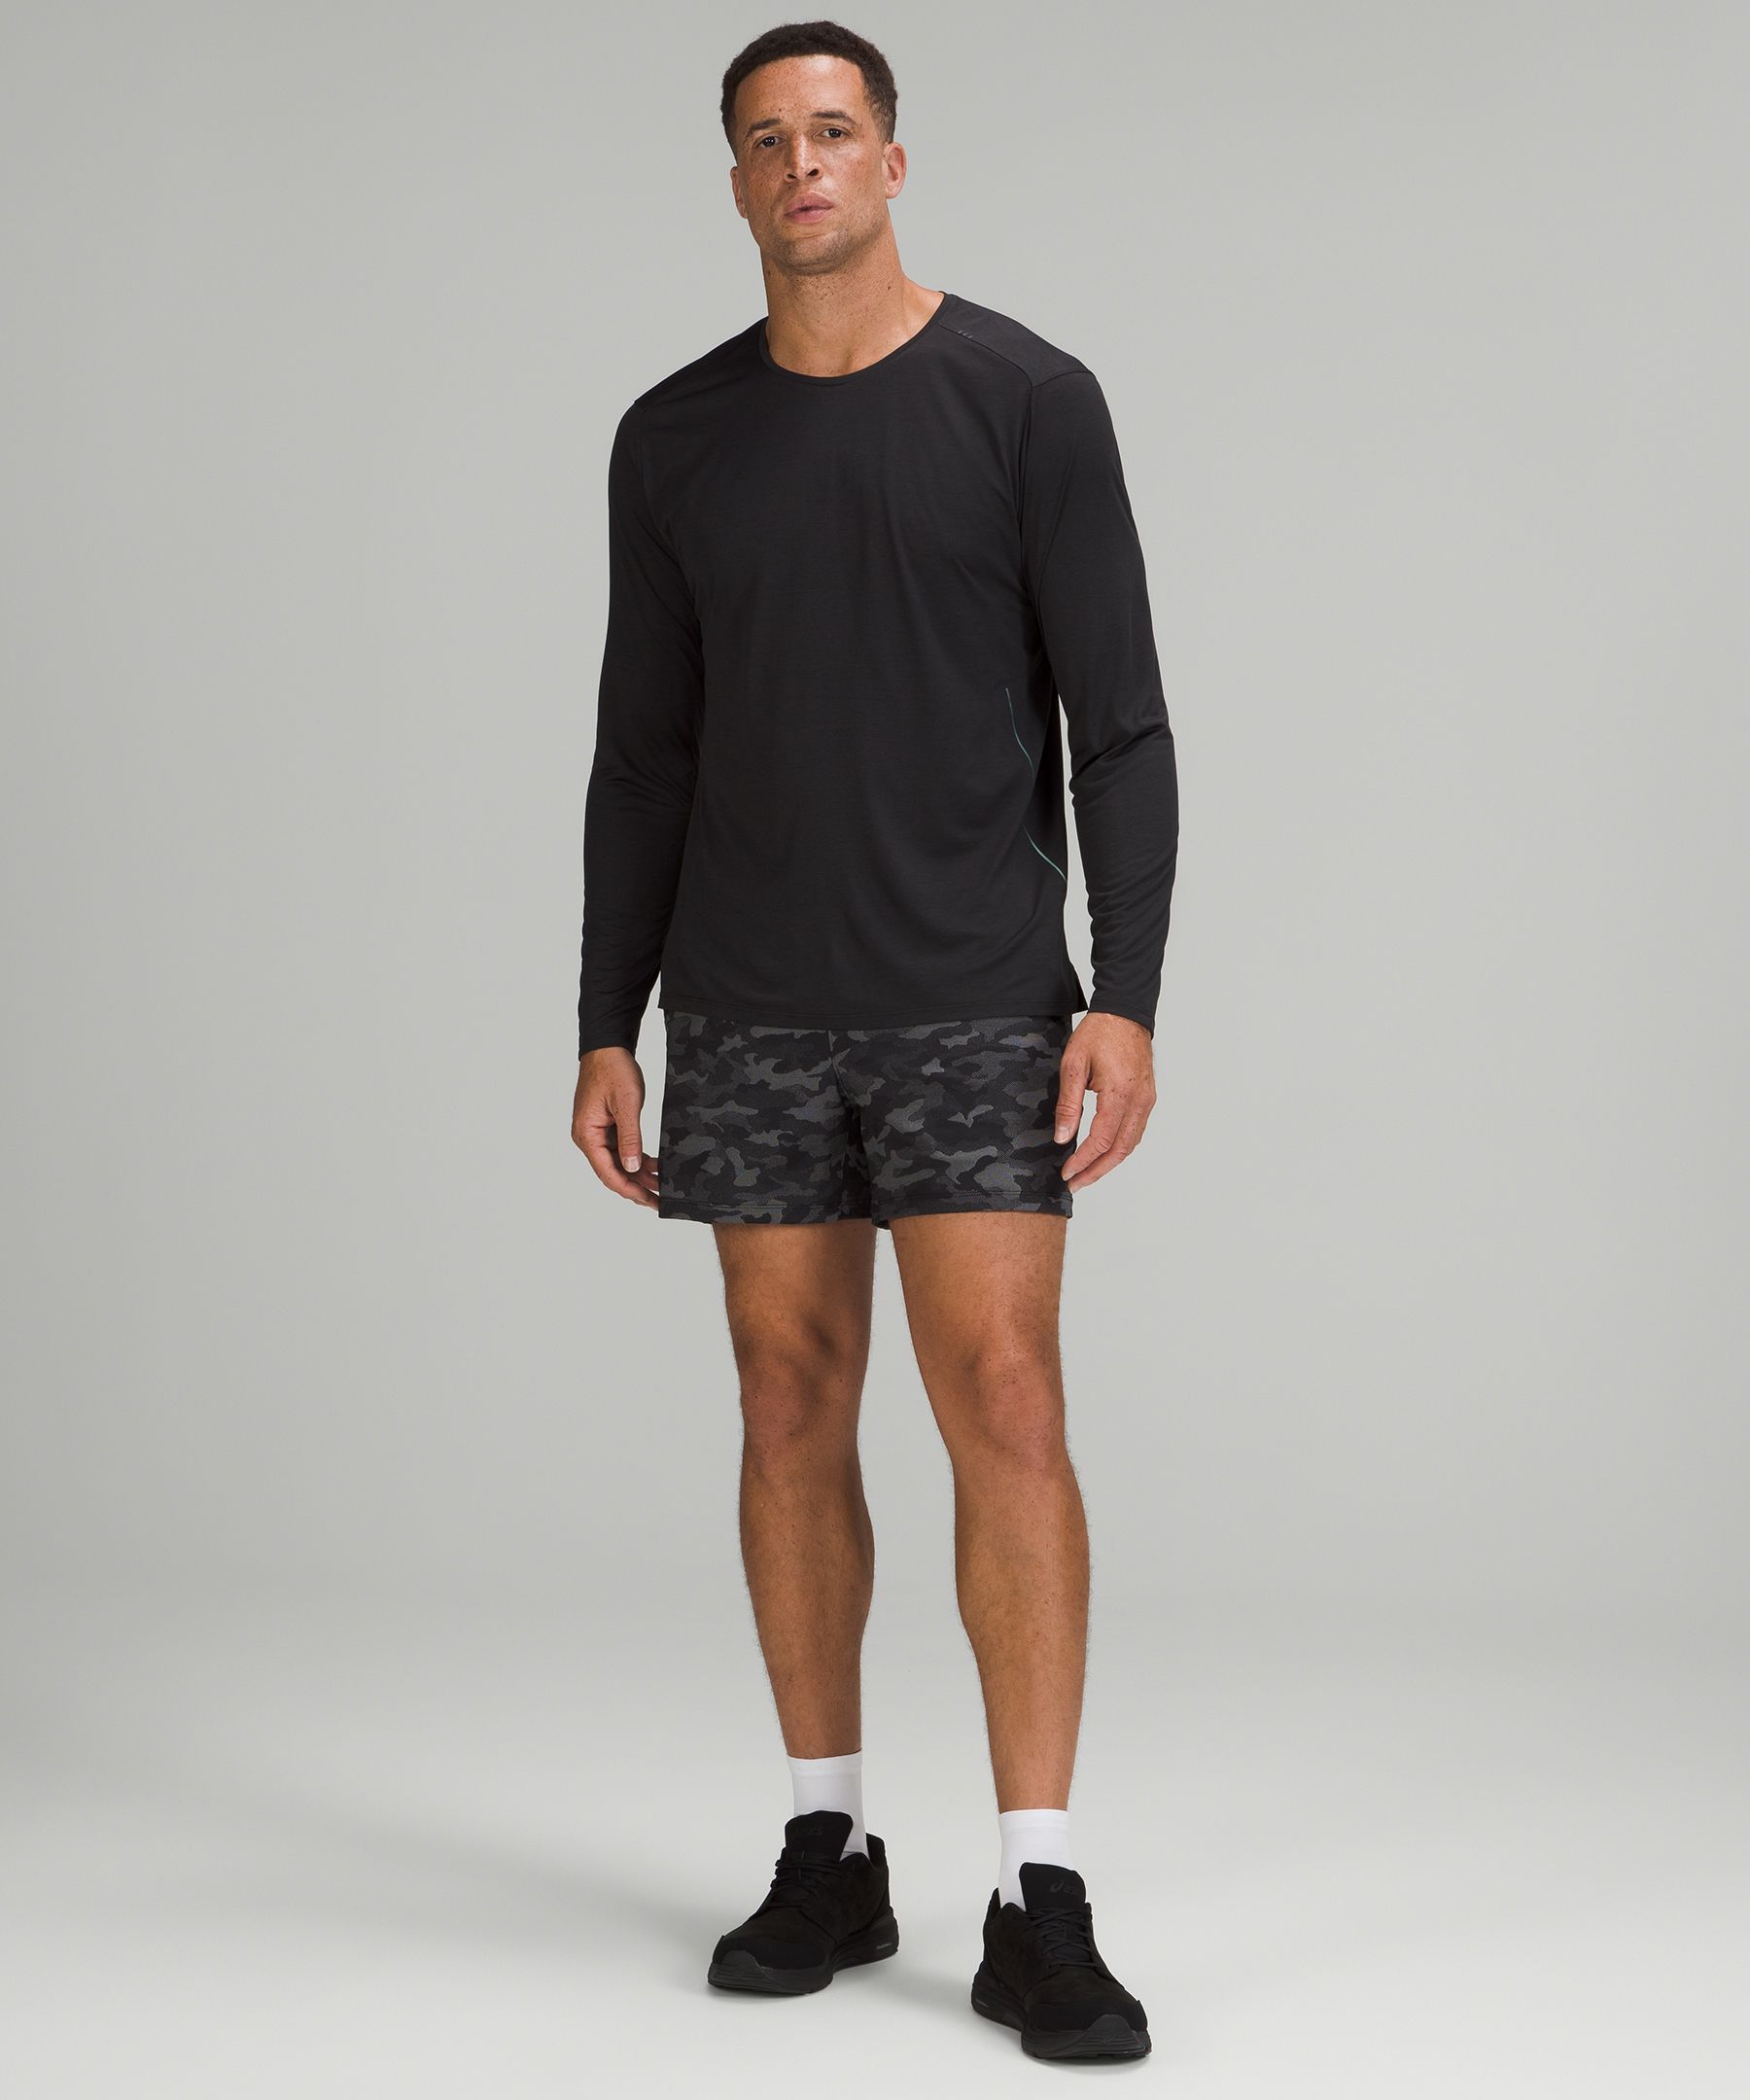 Lululemon Pace Breaker Short 5- Lined – The Shop at Equinox